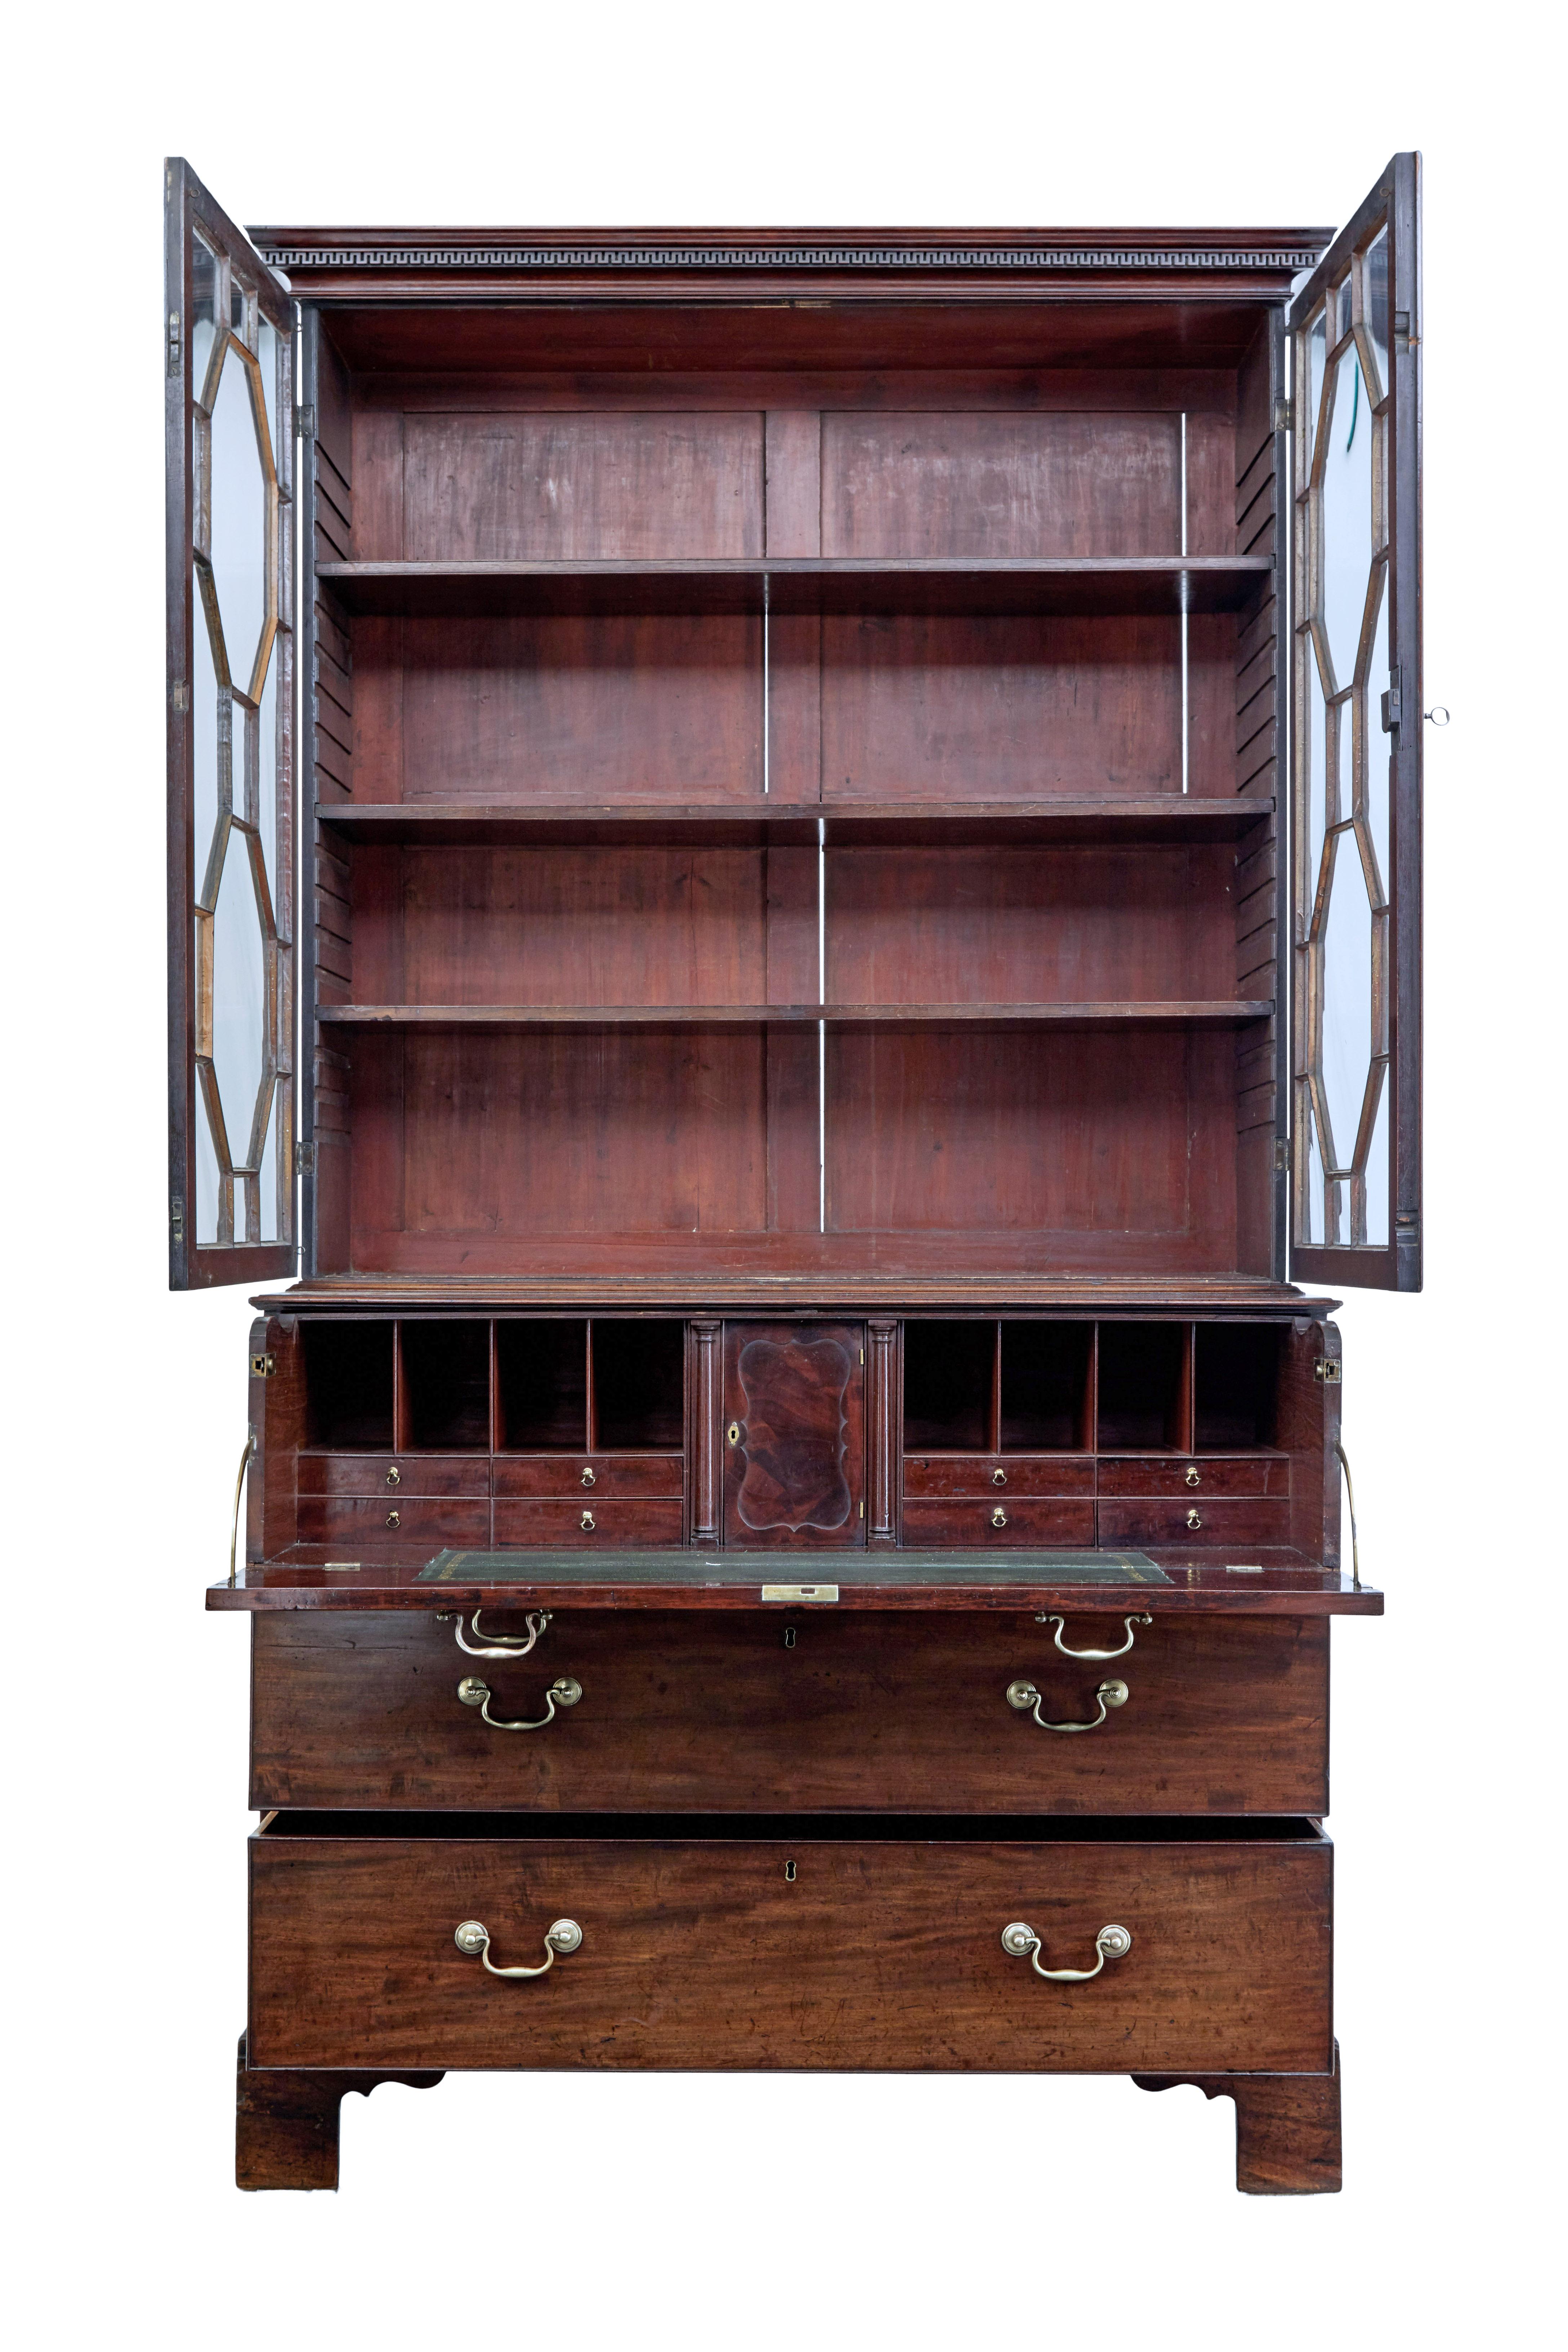 18th century Georgian mahogany secretaire bookcase, circa 1770.

Good quality Georgian period bookcase, comprising of 3 sections. Cornice, bookcase and secretaire chest.

Understated cornice with dentil moulding below which the double door